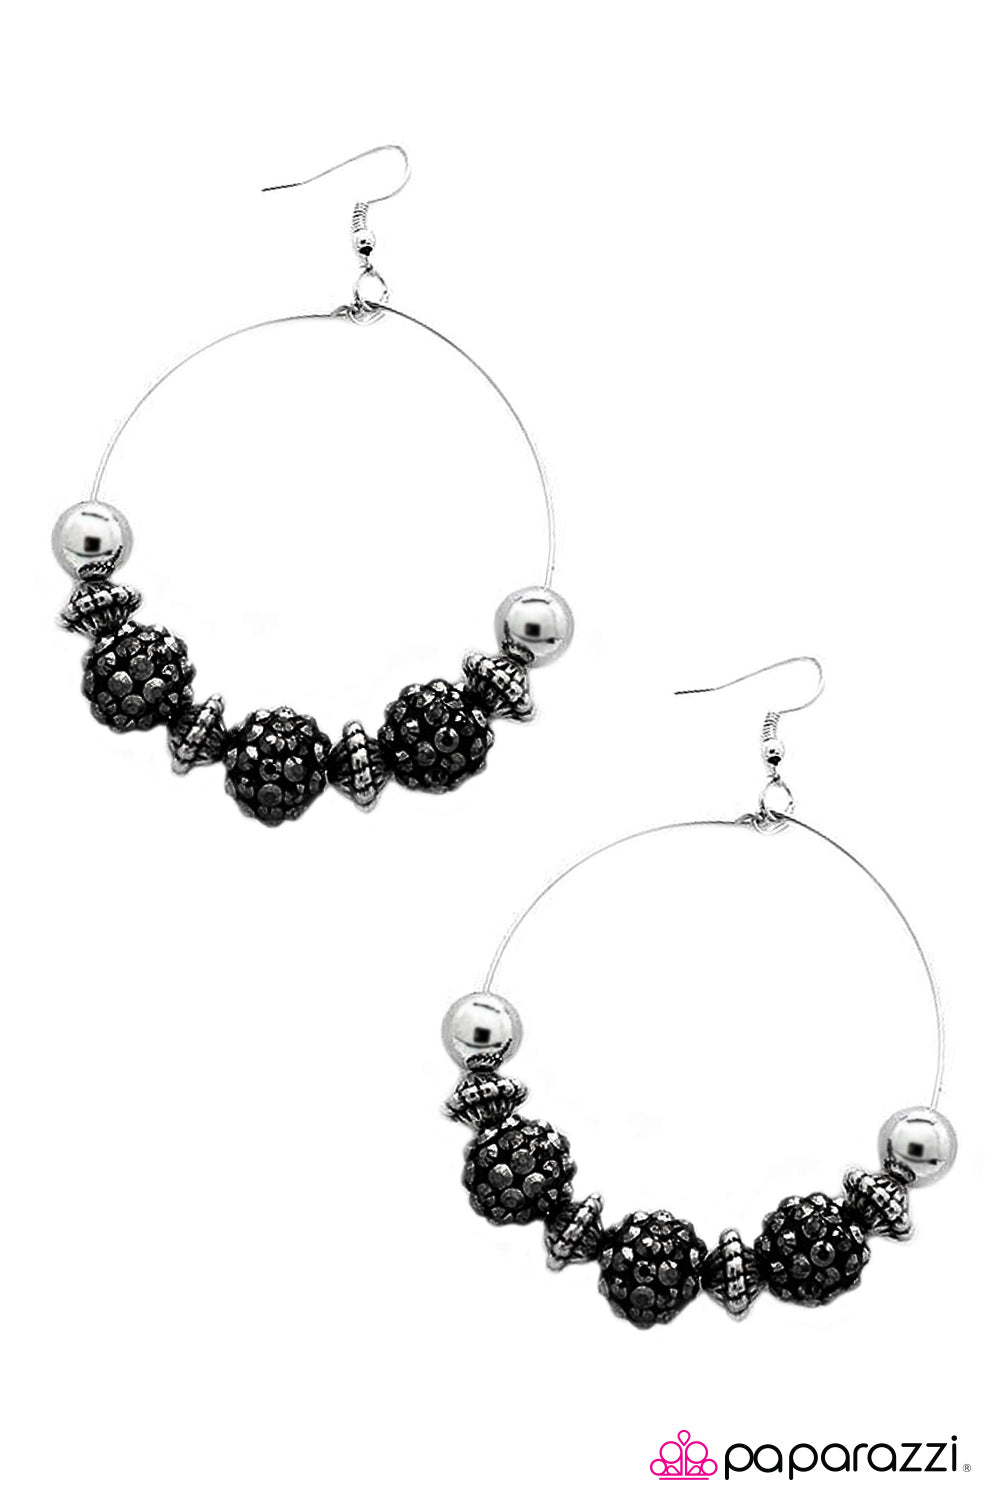 I Can Take a Compliment (Black) Earrings - Paparazzi Accessories